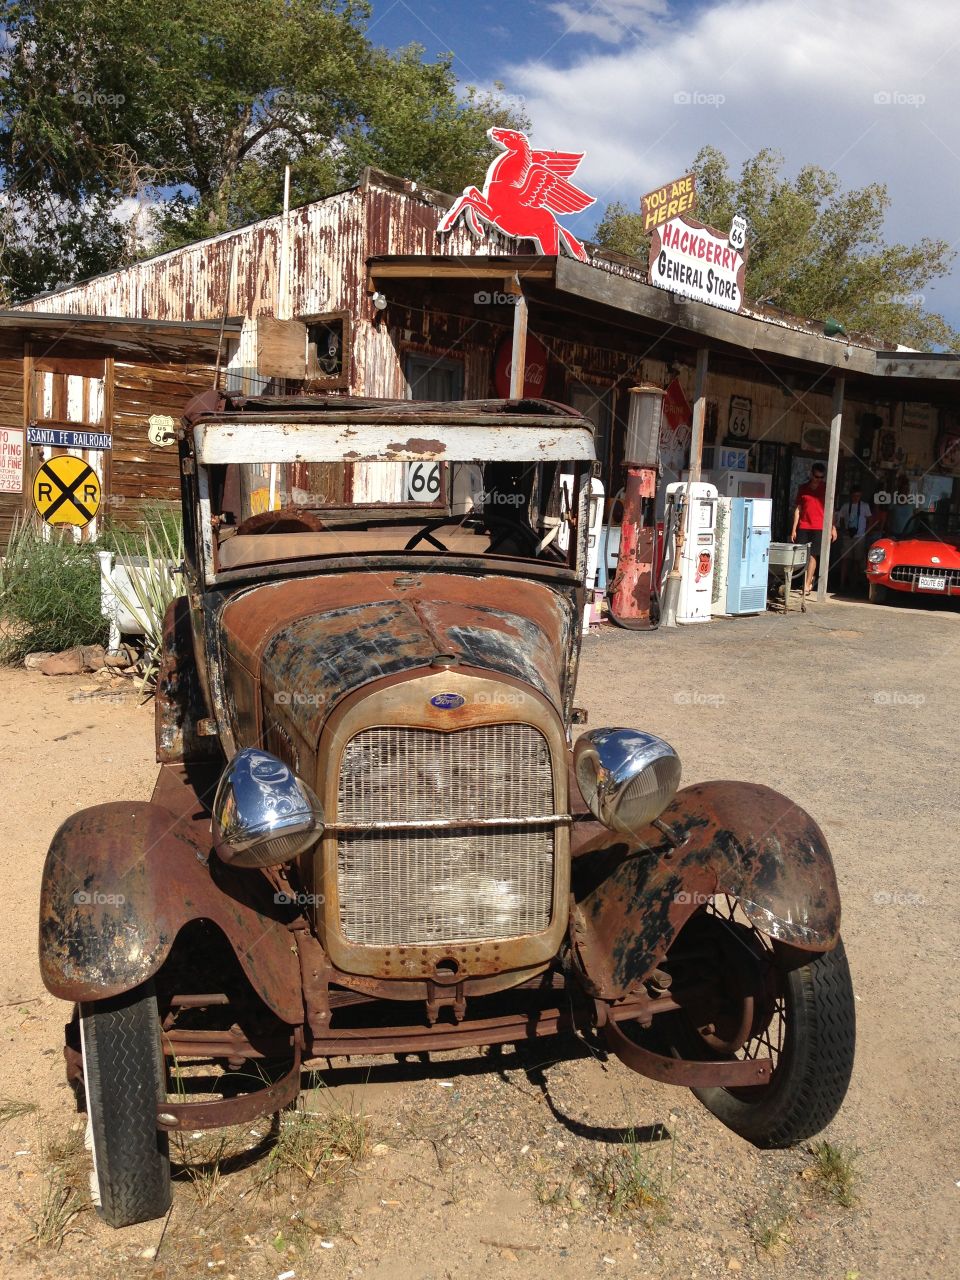 Hackberry General Store . An antique car in front of Hackberry General Store along Route 66 in Arizona 